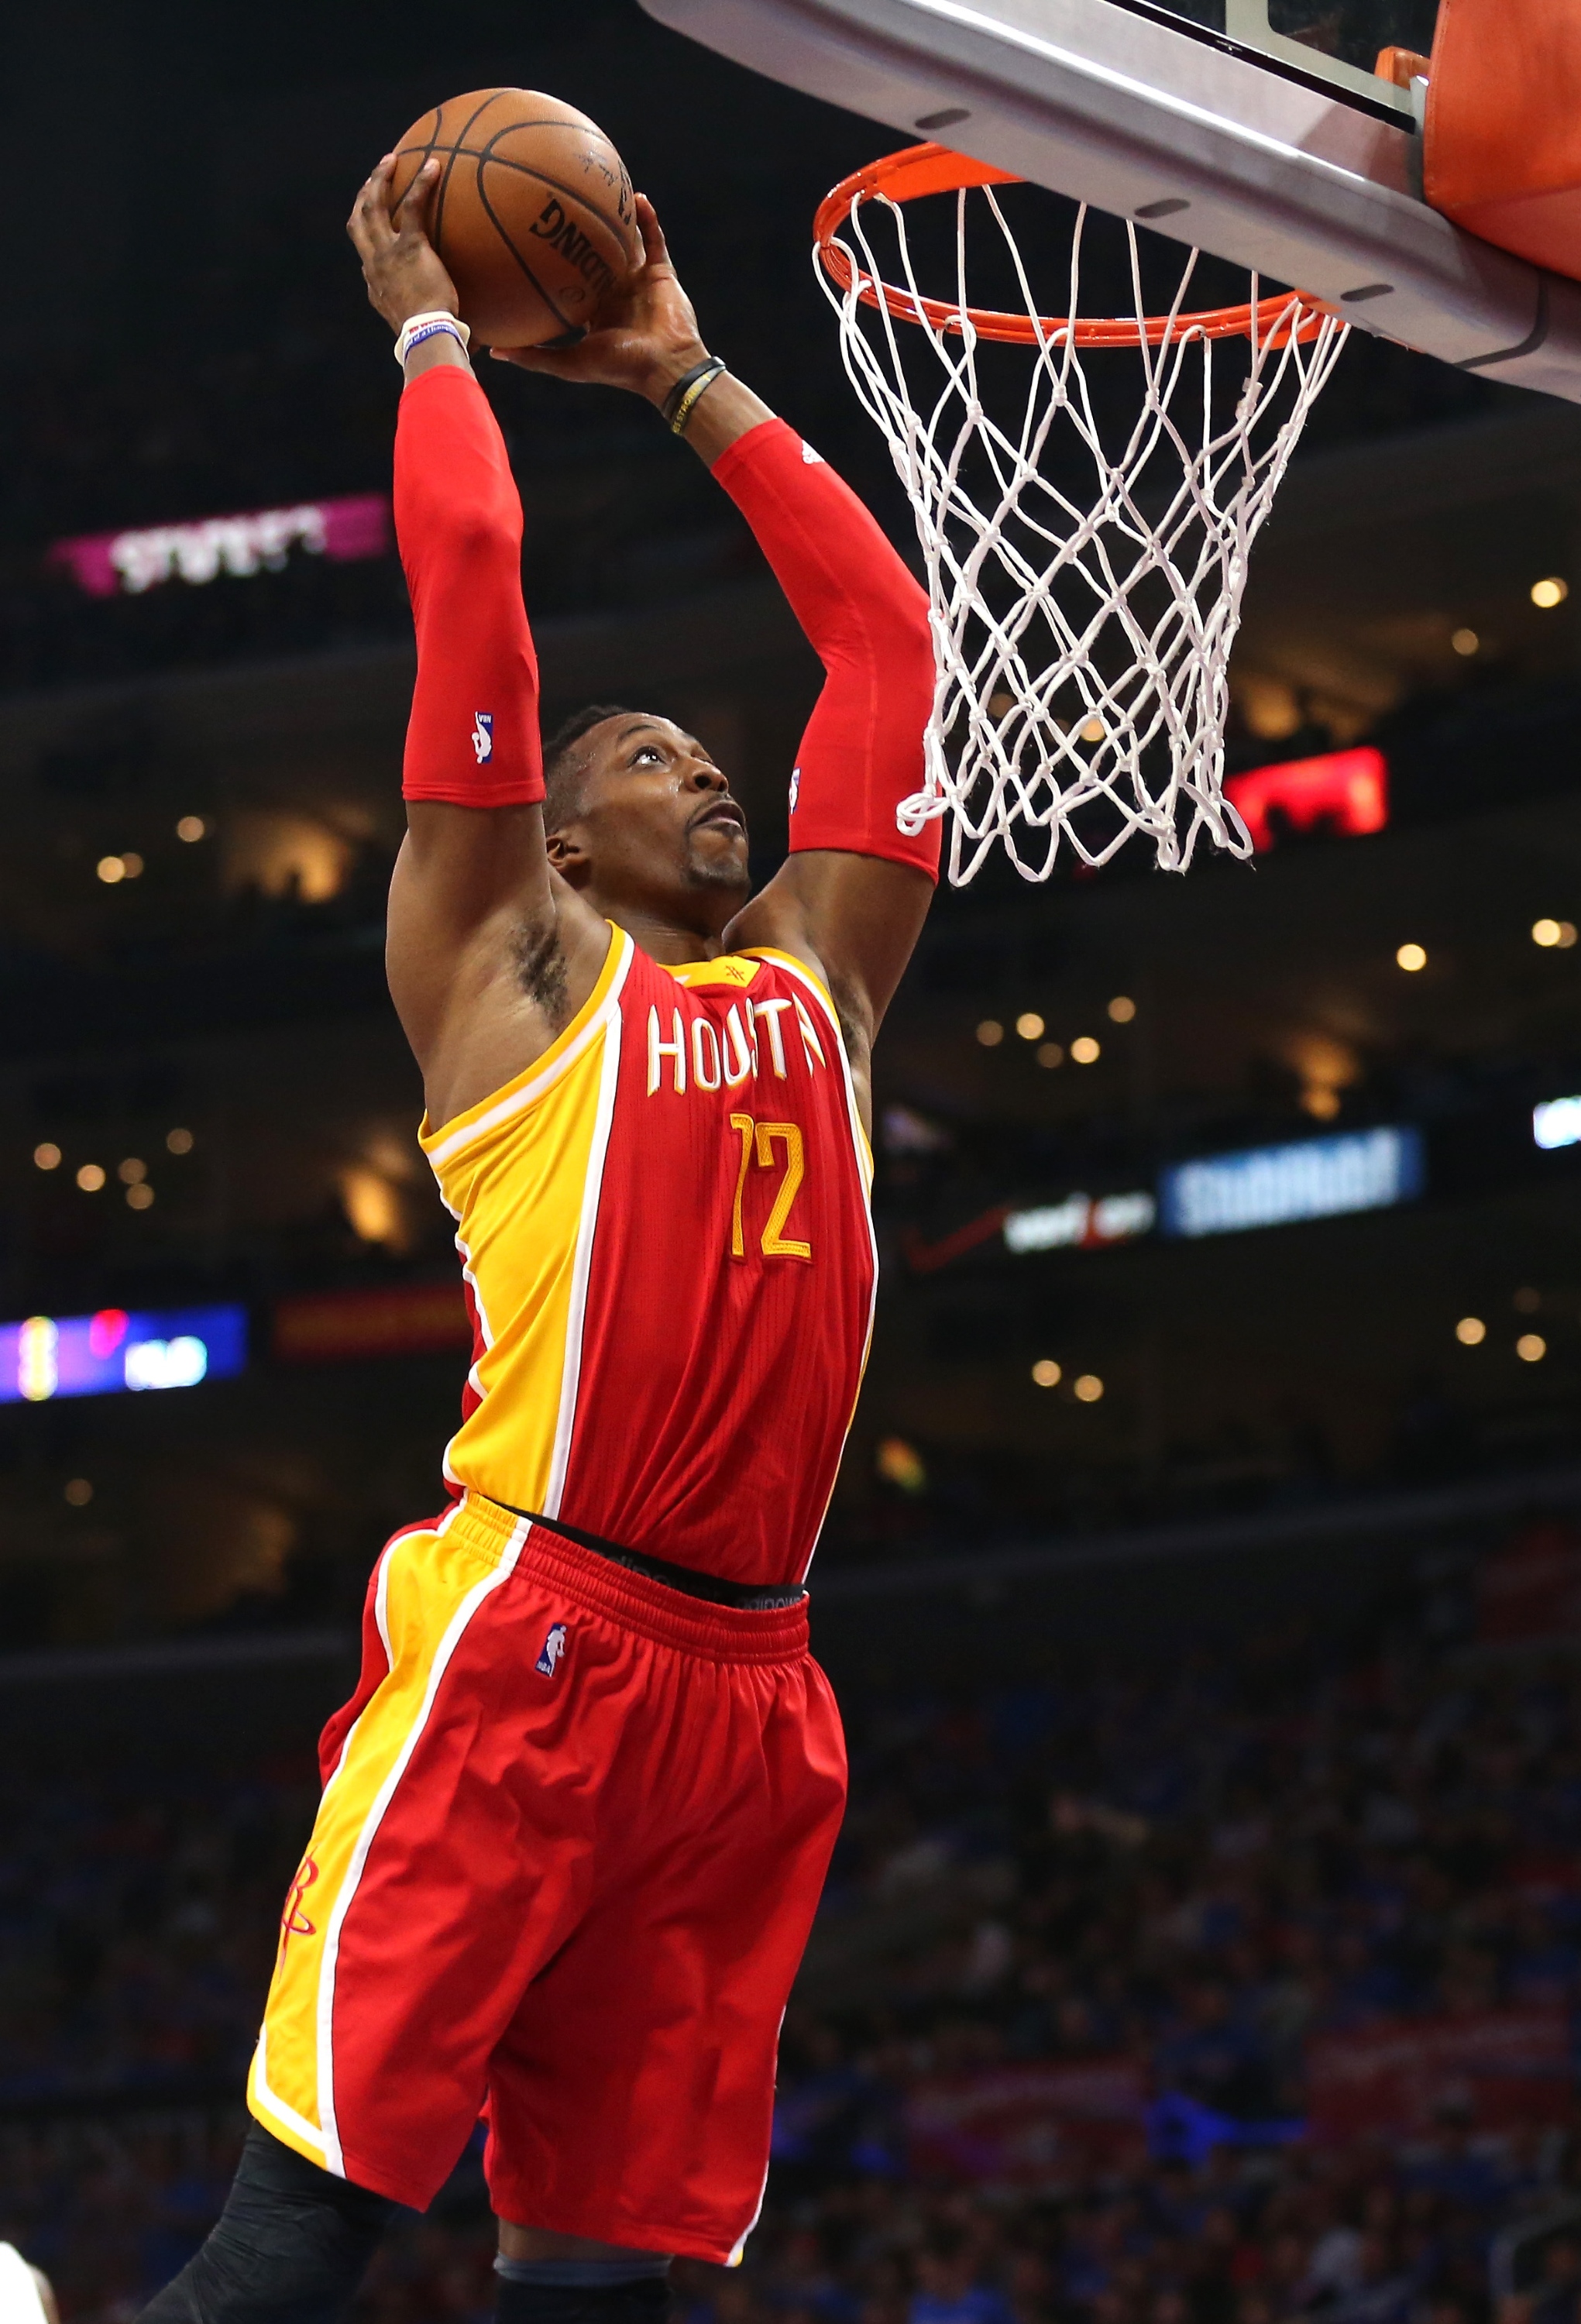 LOS ANGELES, CA - MAY 10:  Dwight Howard #12 of the Houston Rockets dunks against the Los Angeles Clippers during Game Four of the Western Conference semifinals of the 2015 NBA Playoffs at Staples Center on May 10, 2015 in Los Angeles, California.  NOTE TO USER: User expressly acknowledges and agrees that, by downloading and or using this photograph, User is consenting to the terms and conditions of the Getty Images License Agreement.  (Photo by Stephen Dunn/Getty Images)